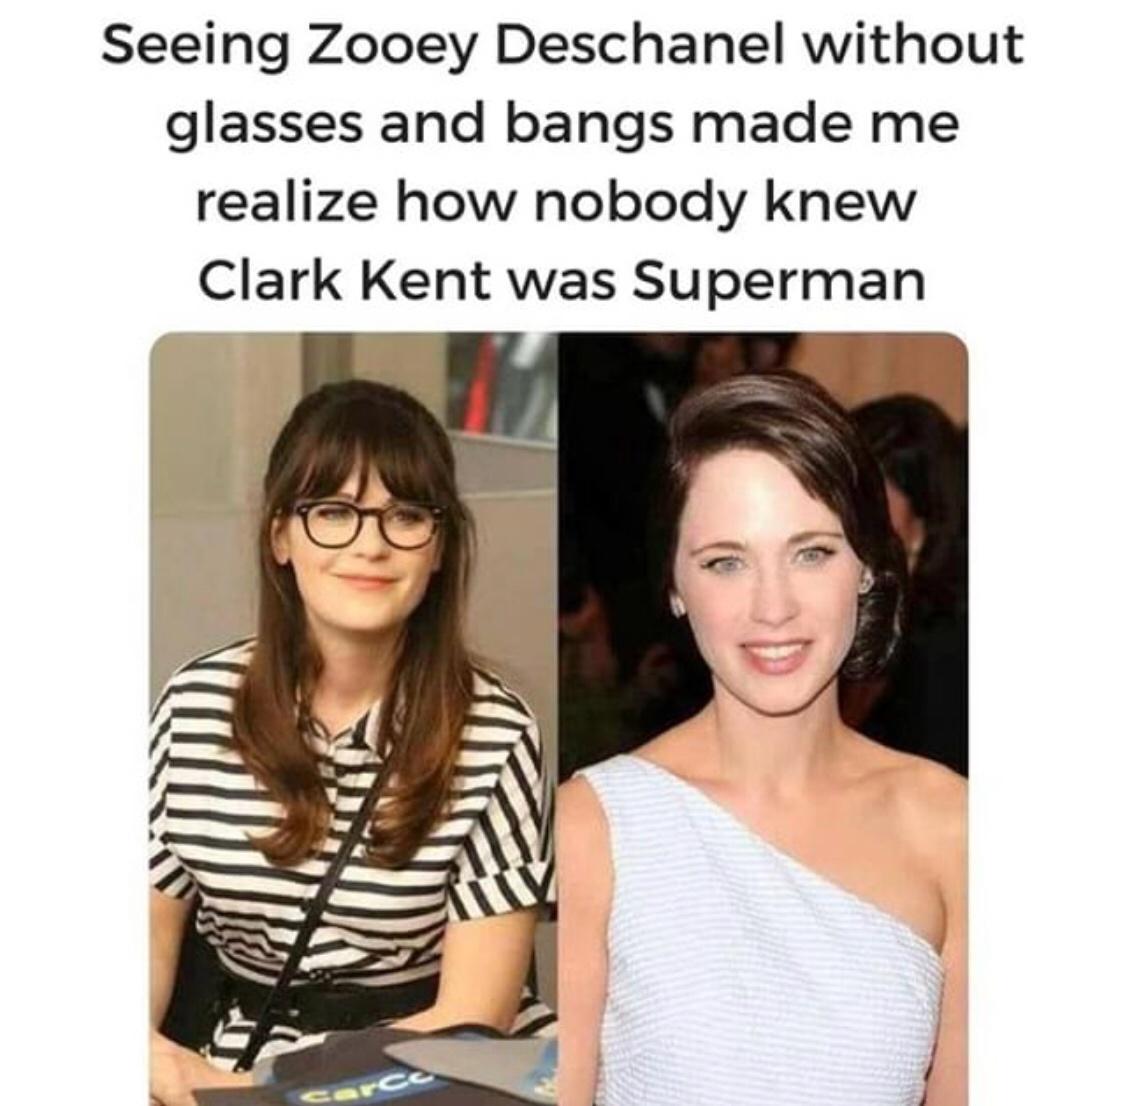 zooey deschanel meme - Seeing Zooey Deschanel without glasses and bangs made me realize how nobody knew Clark Kent was Superman